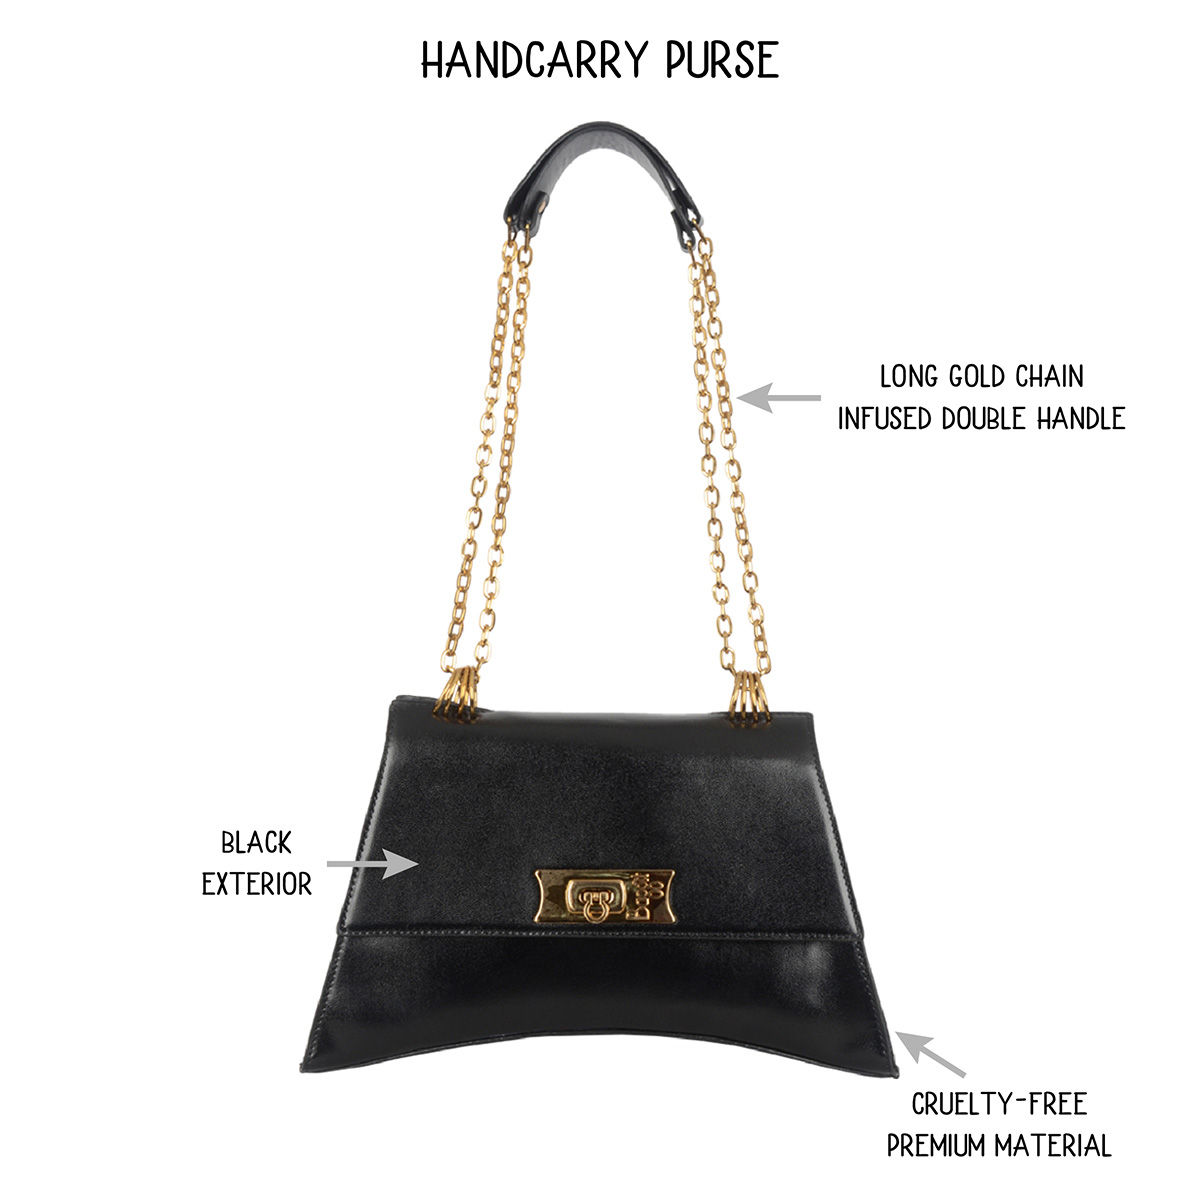 Statement Bags That Are Actually Worth The Investment | Bags, Handbag  straps, Bags designer